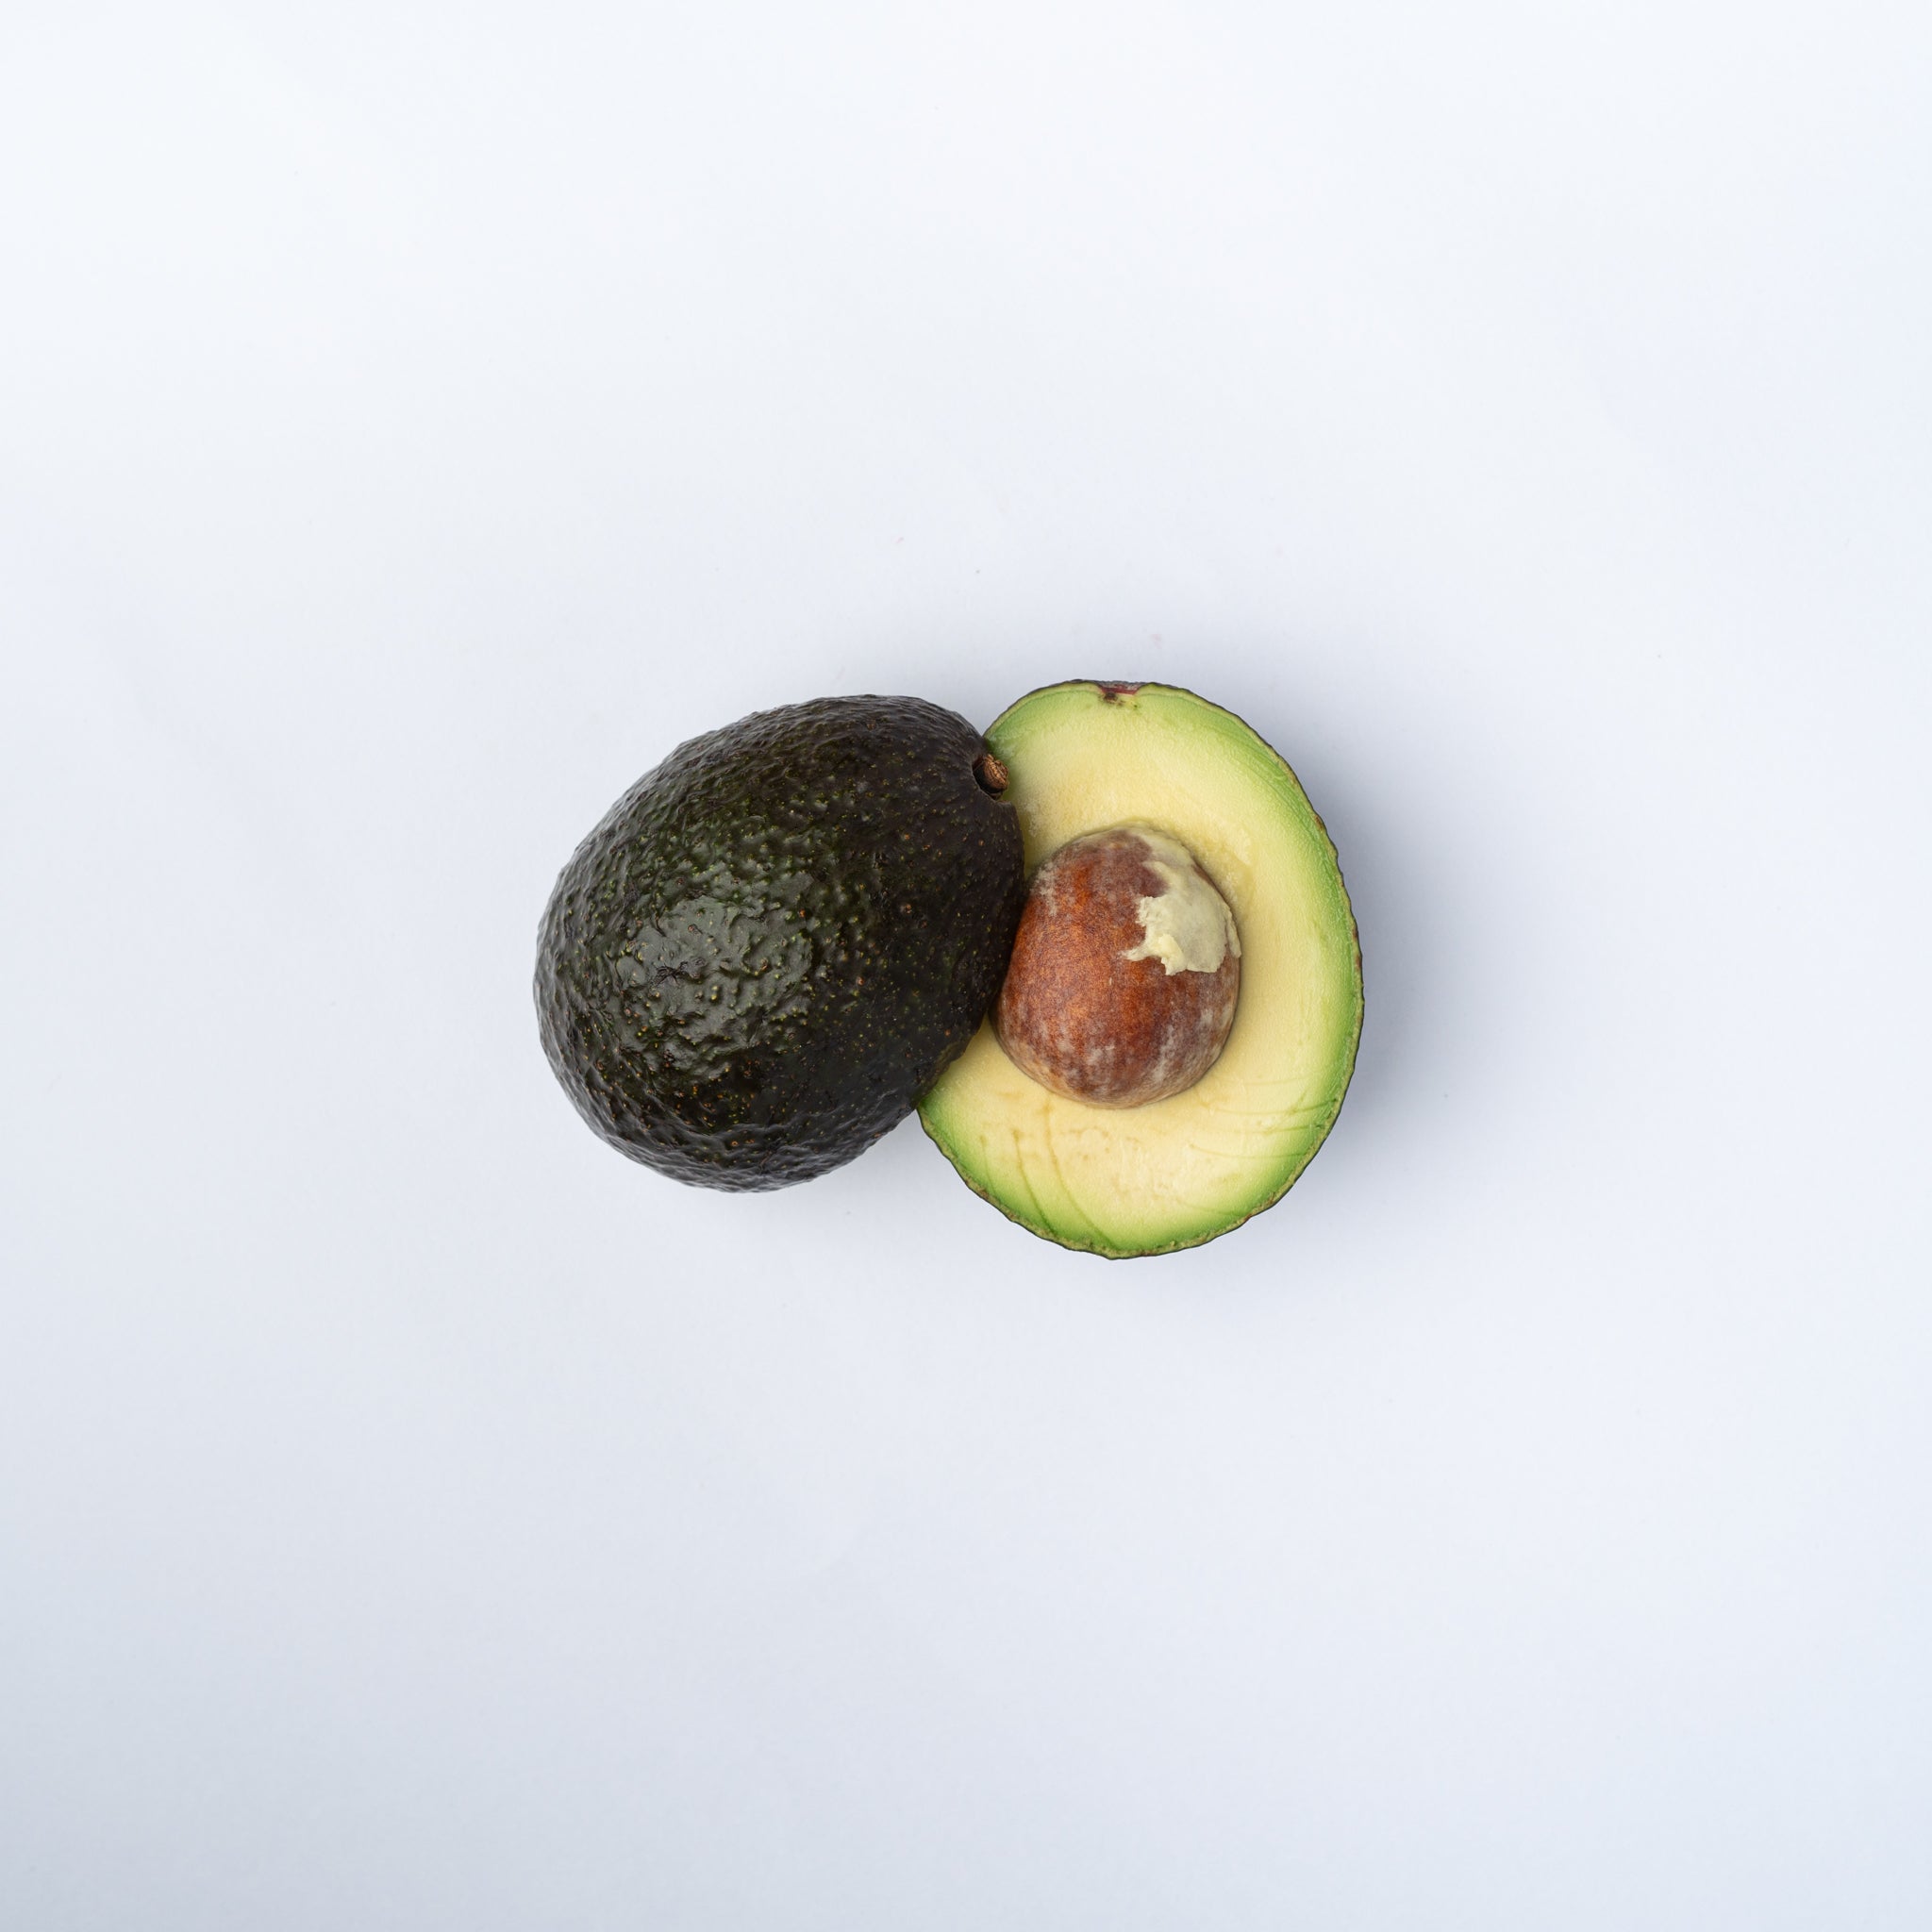 A ripe avocado cut in half with the stone and green flesh showing.